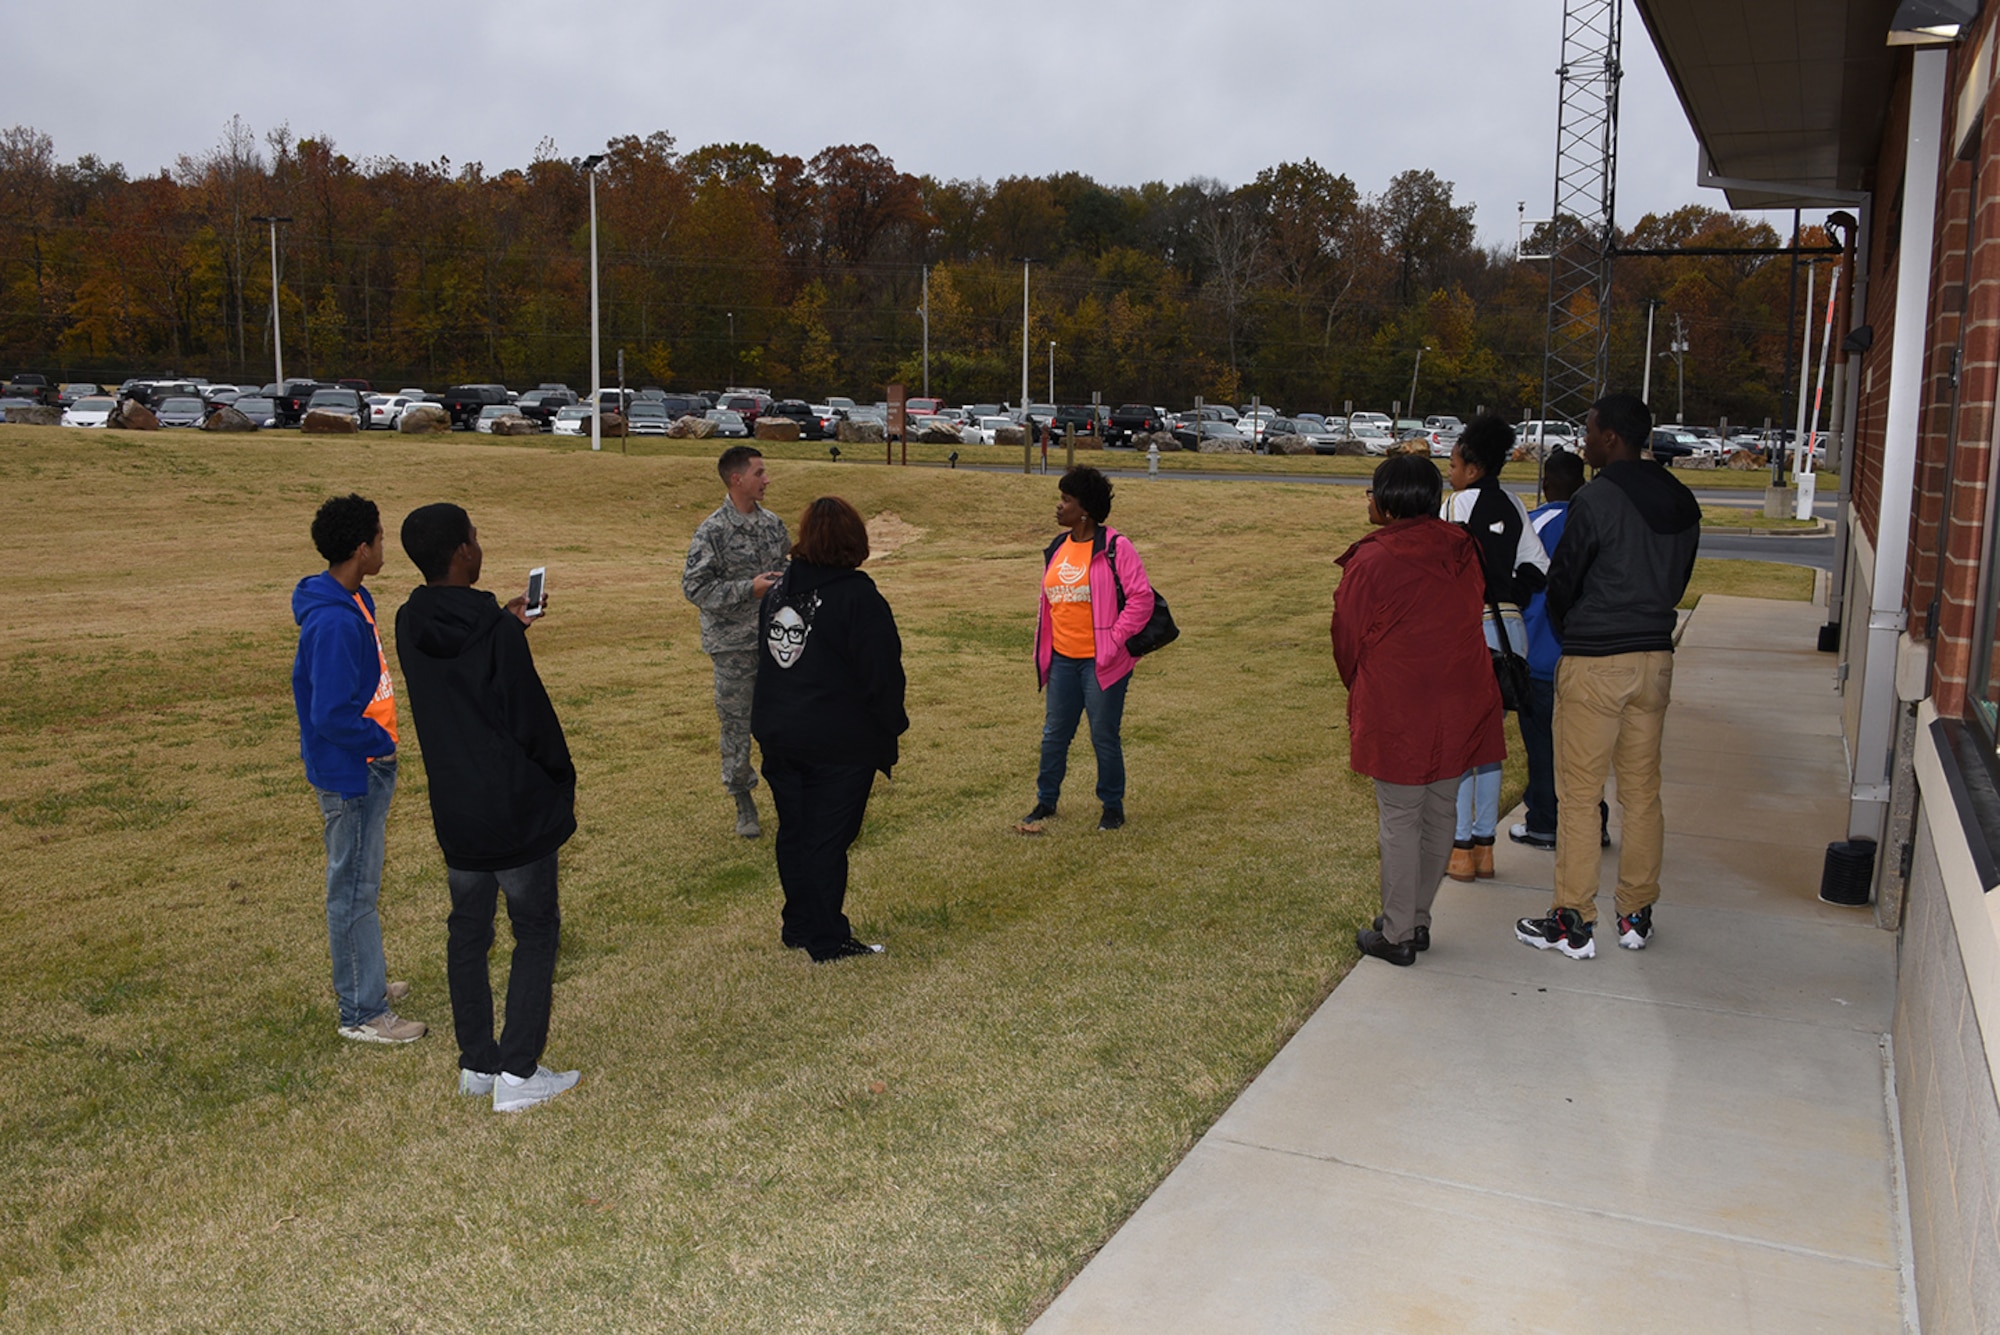 SSgt. David Wilbur instructs the tour group 'A Taste of Aviation about the Radio Frequency antennas in use at the 164th Airlift Wing in Memphis, TN Dec.3, 2016. 'A Taste of Aviation is a regional non-profit that mentors youth and introduces them to aviation and aeronautics.